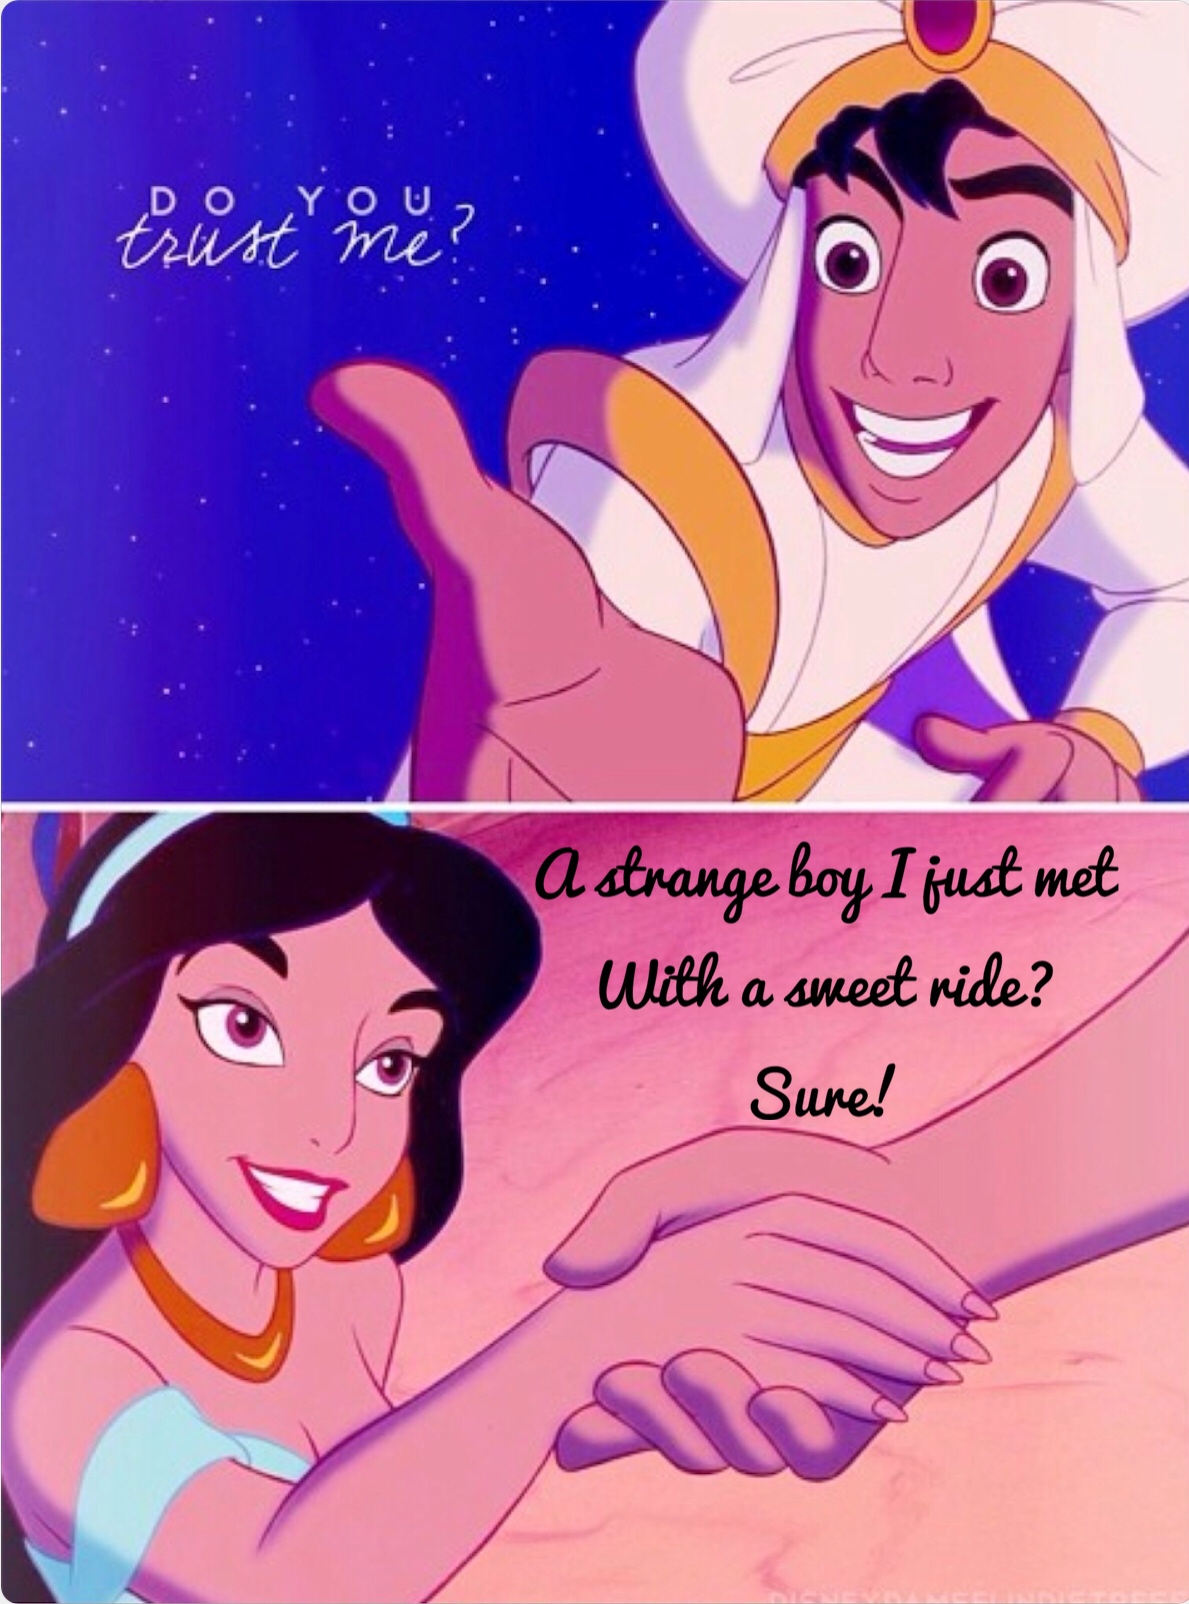 do you trust me aladdin - trust me? a strange boy I just met With a sweet ride? Sure!